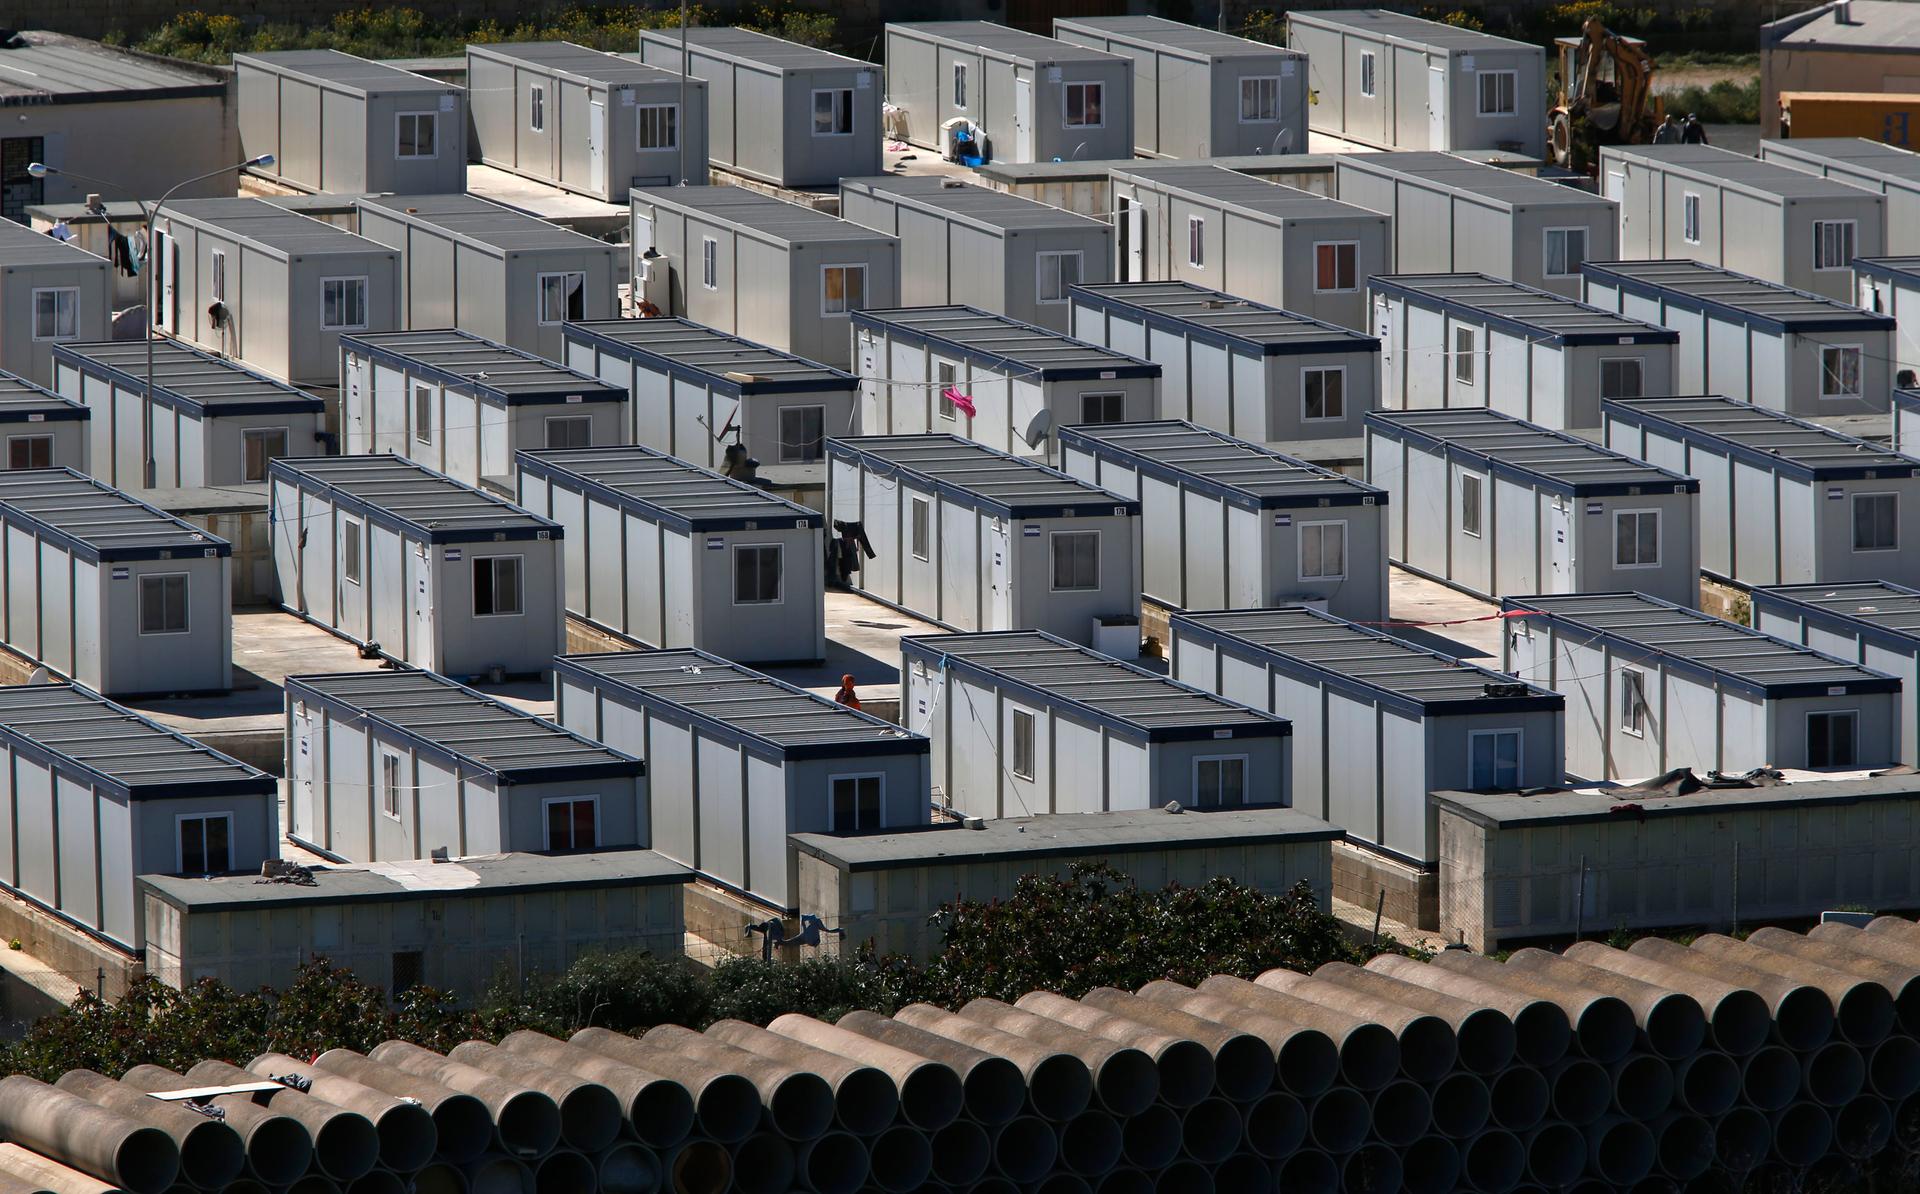 African immigrants walk among rows of prefabricated container houses, which have replaced scores of tents, at the open centre for immigrants formerly known as "Tent City" in Hal Far, outside Valletta March 27, 2014. In 2013